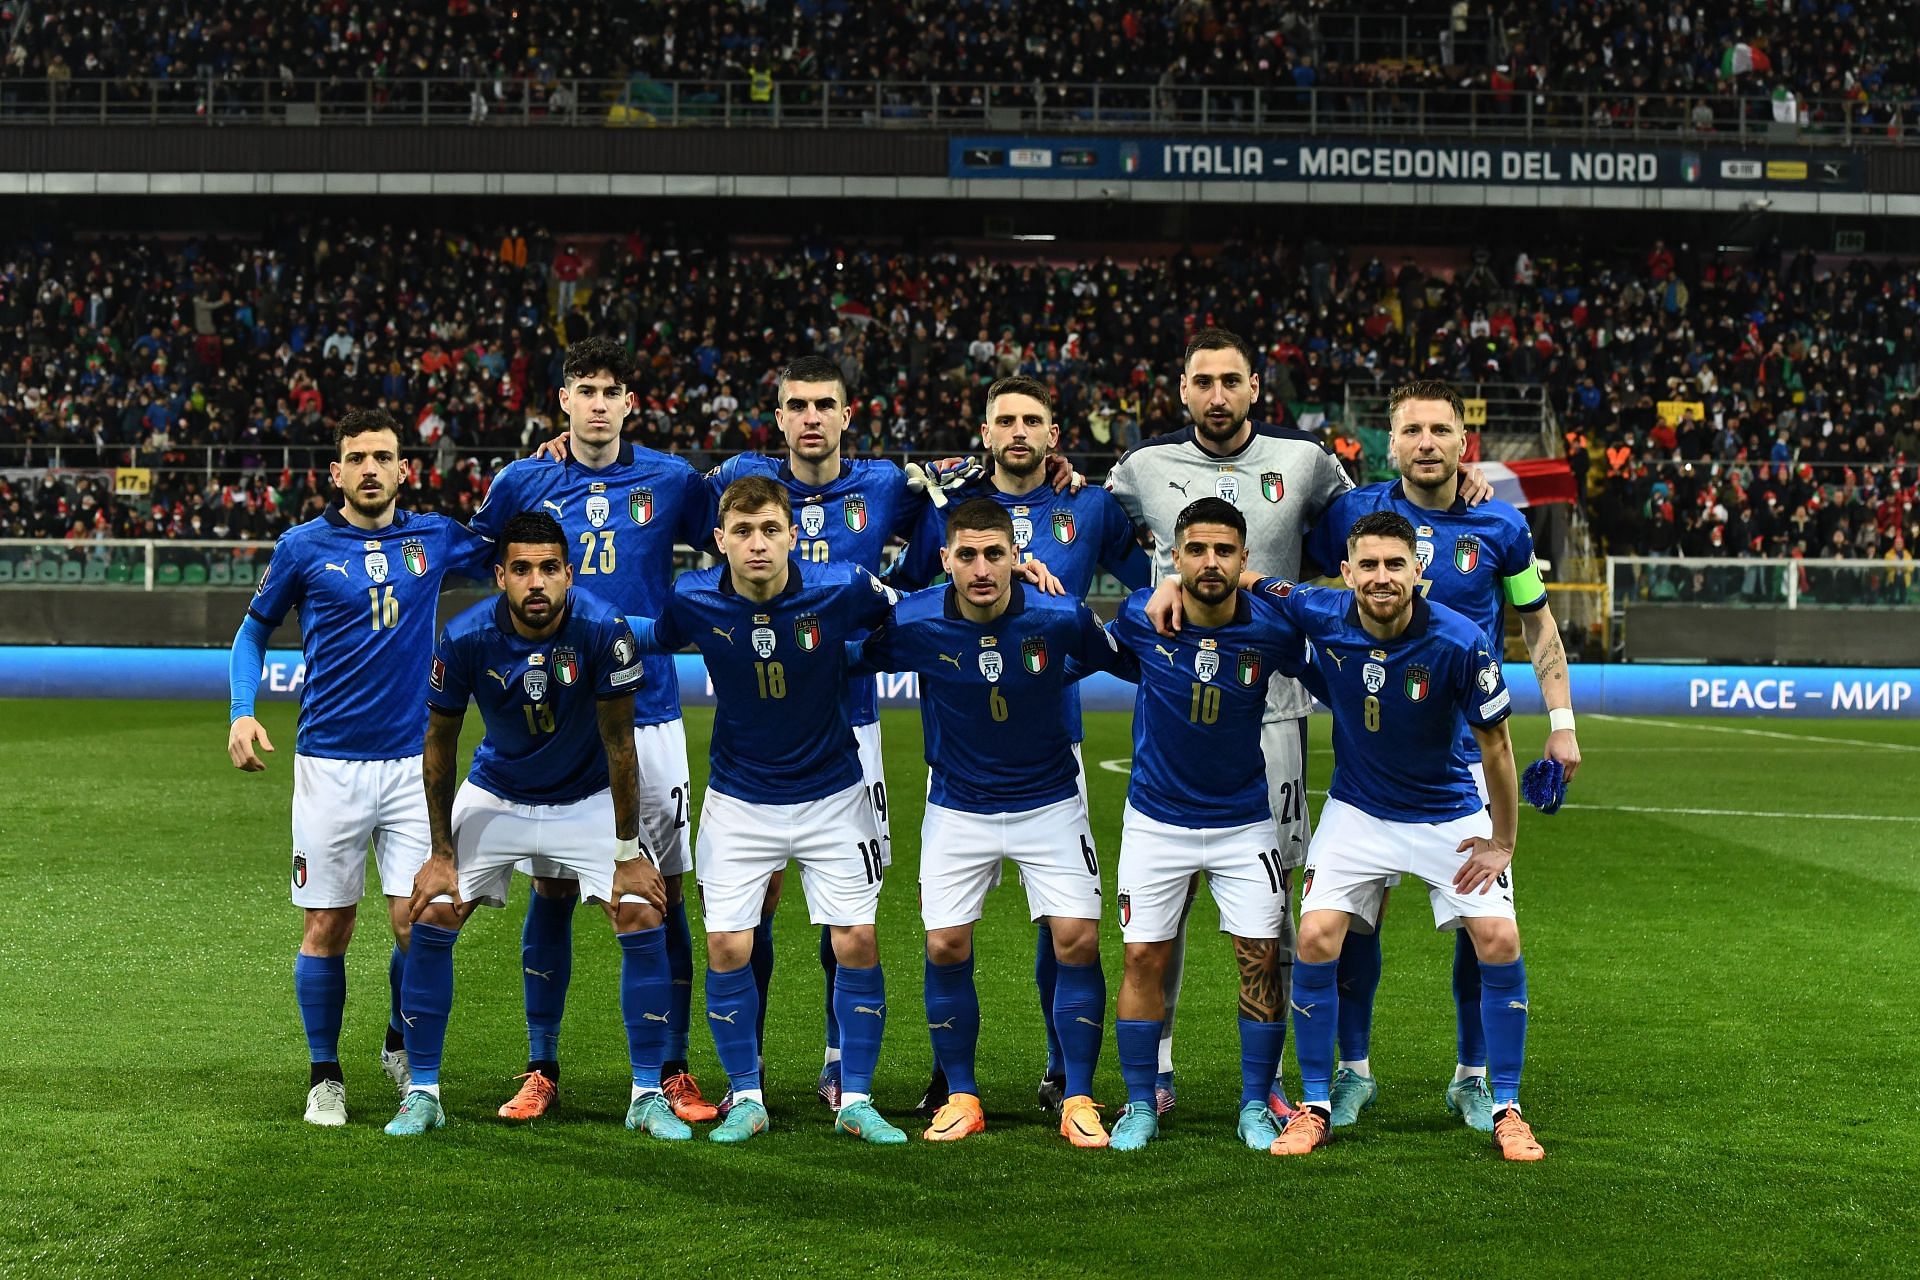 The Azzurri were without some key players against North Macedonia in the knockout round playoffs - 2022 FIFA World Cup Qualifier